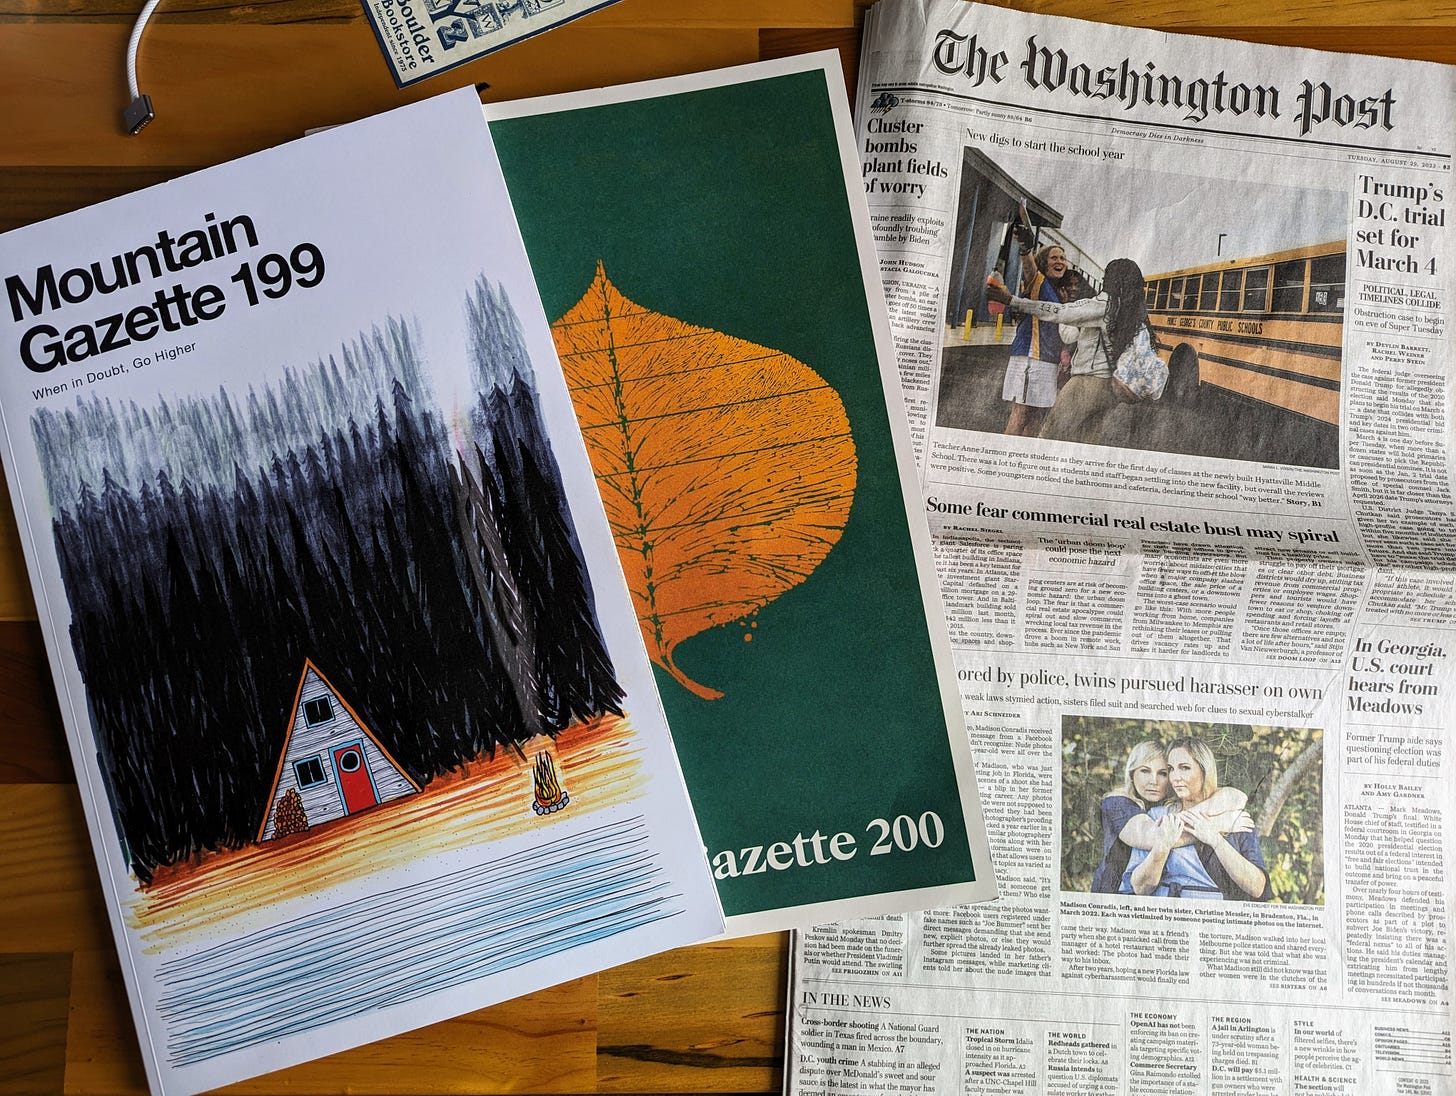 The covers of Mountain Gazette 199 and 200 and an issue of The Washington Post.